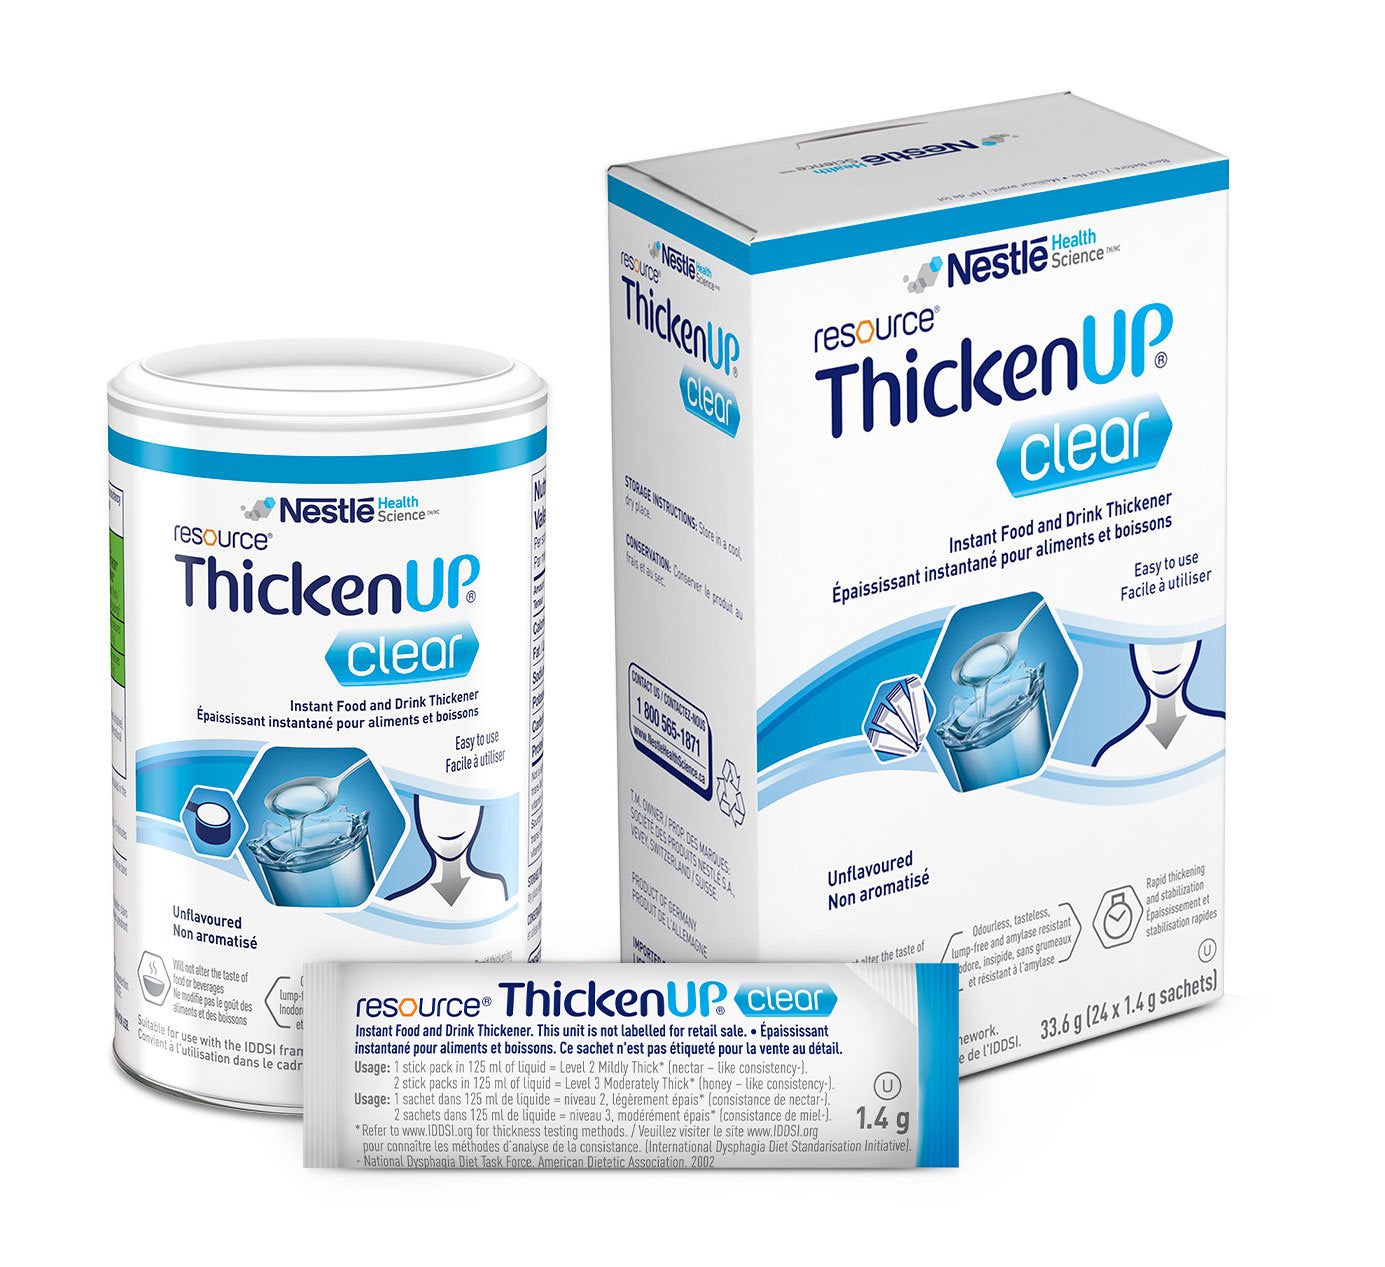 thickenup image